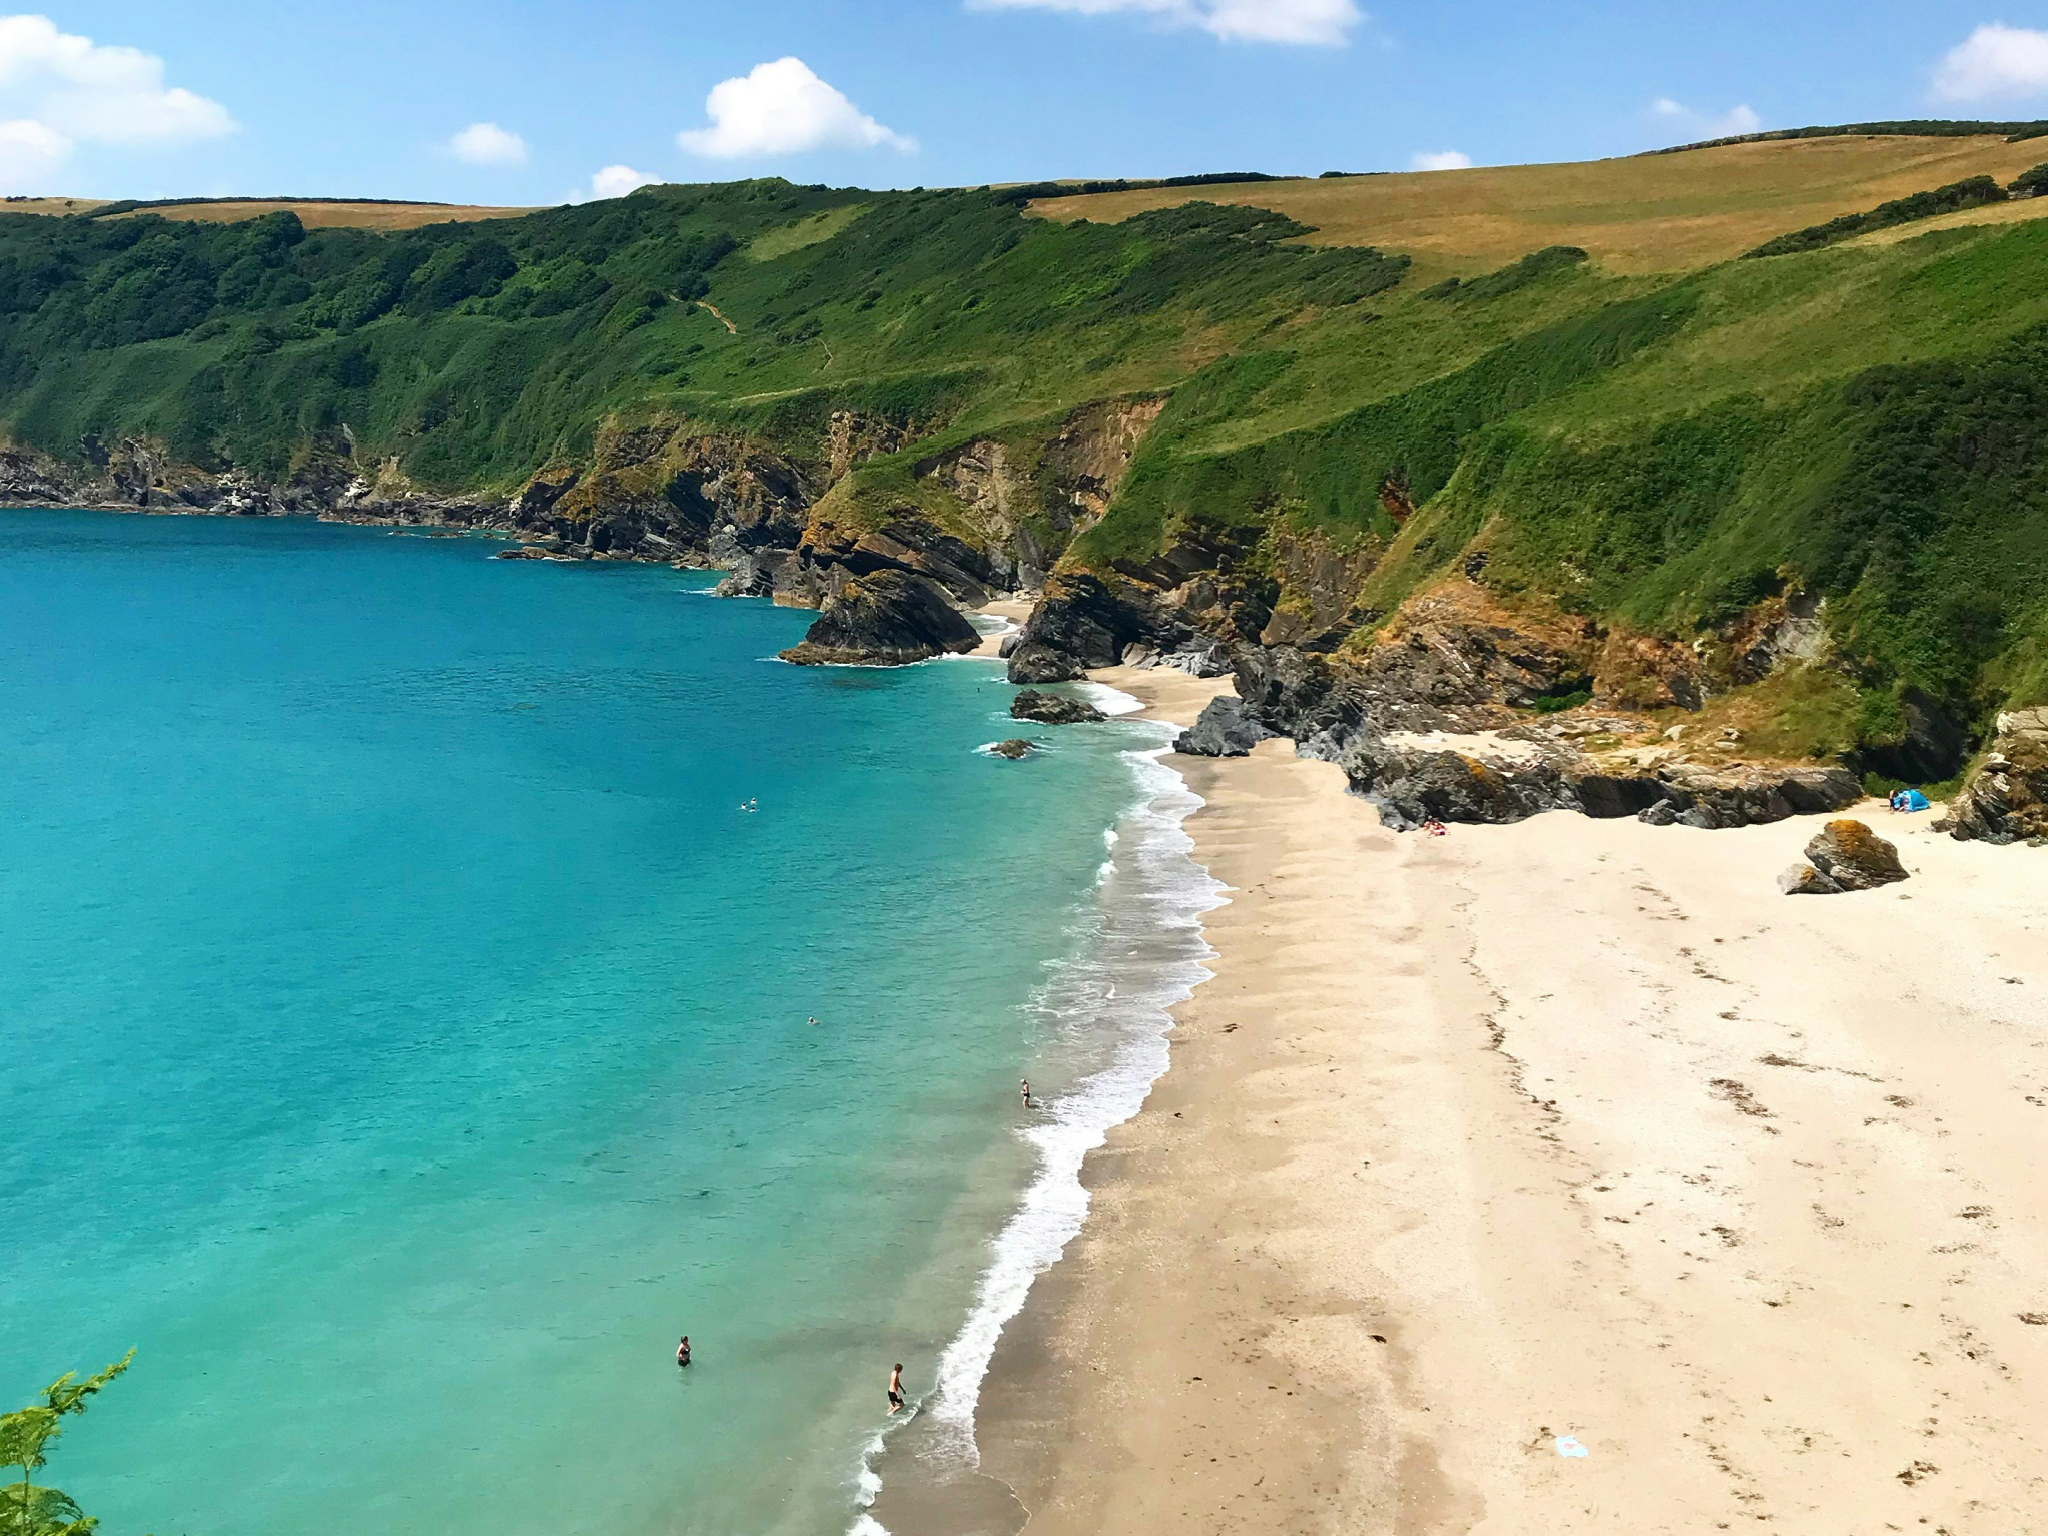 Discover hidden coastal spots, such as secluded Lantic Bay, Cornwall